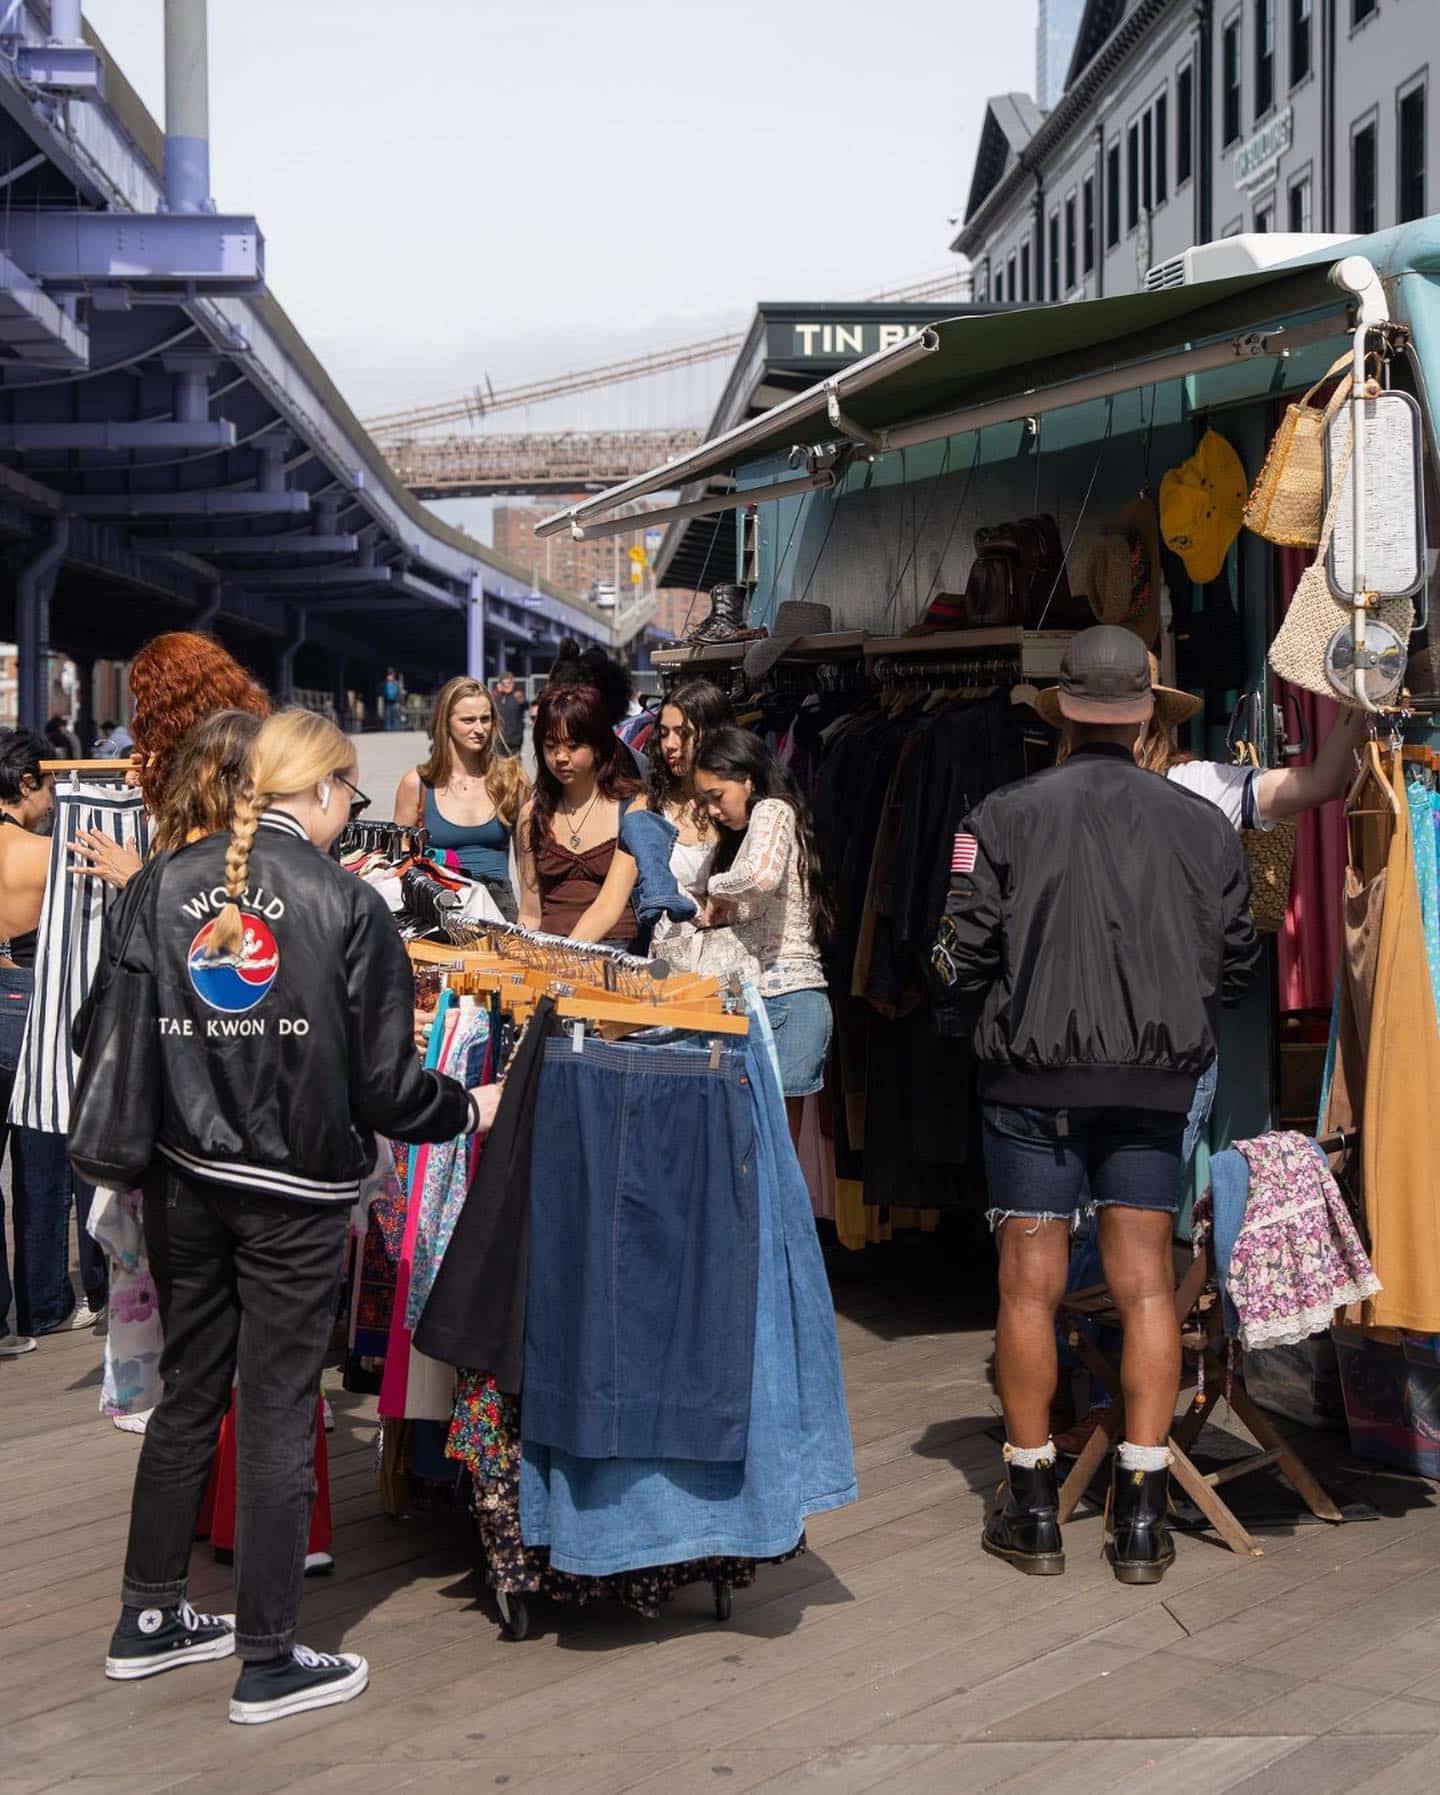 Curated finds, al fresco. Discover a creative collection of vintage clothes, jewelry and art at the @hesterstreetfair. 🗓️ Sat, 5/13  11am – 6pm Seaport Square Details ➤ link in bio. #TheSeaport